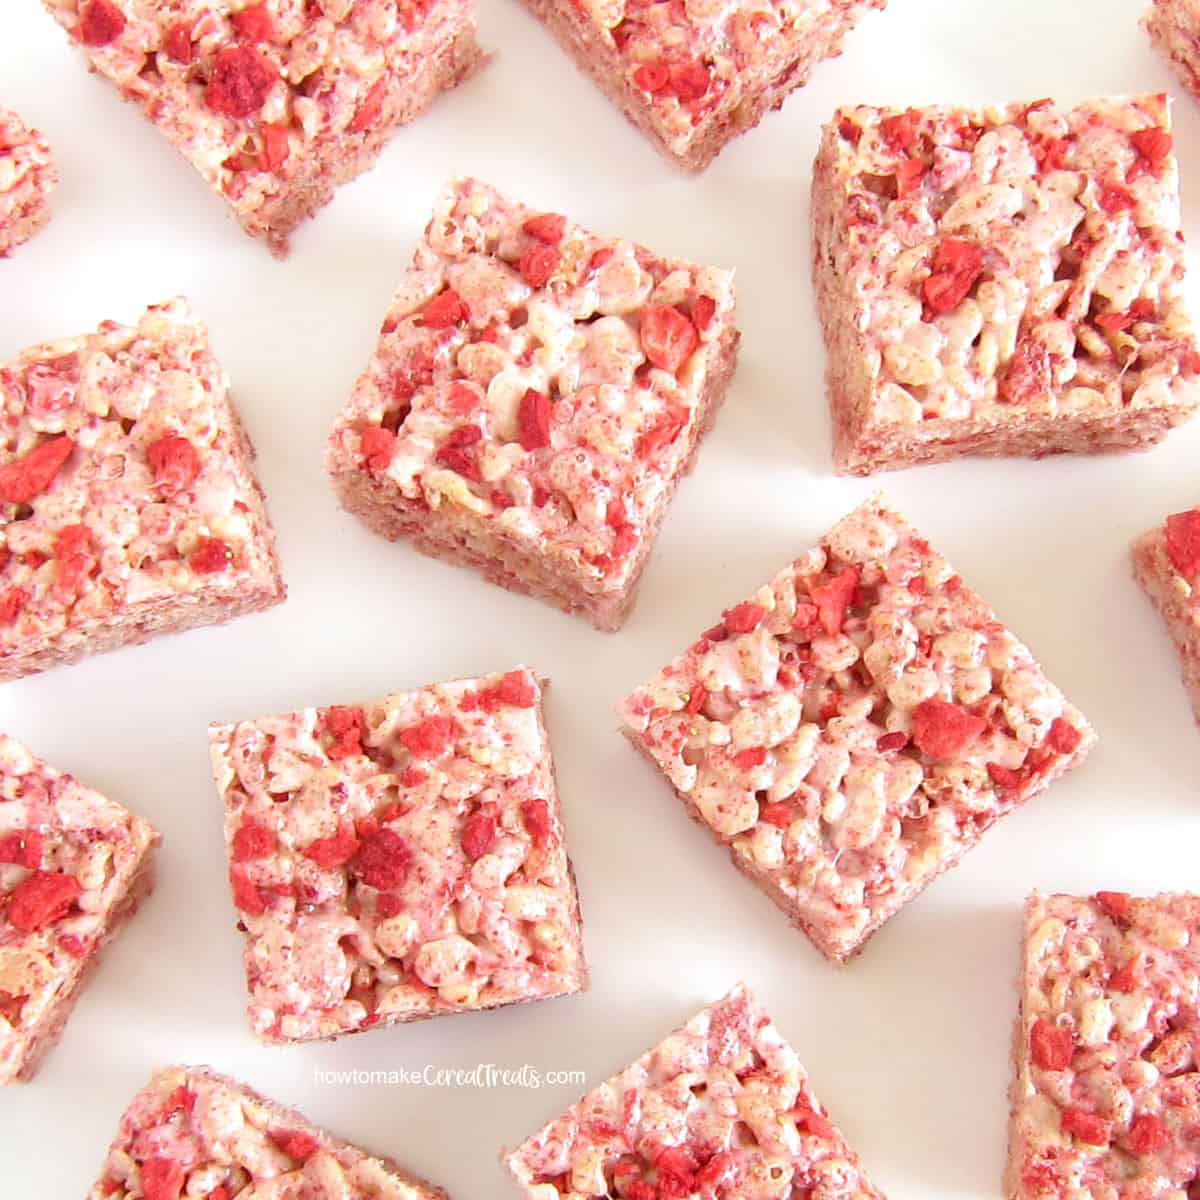 Strawberry-filled rice krispie treat squares arranged on a white background.